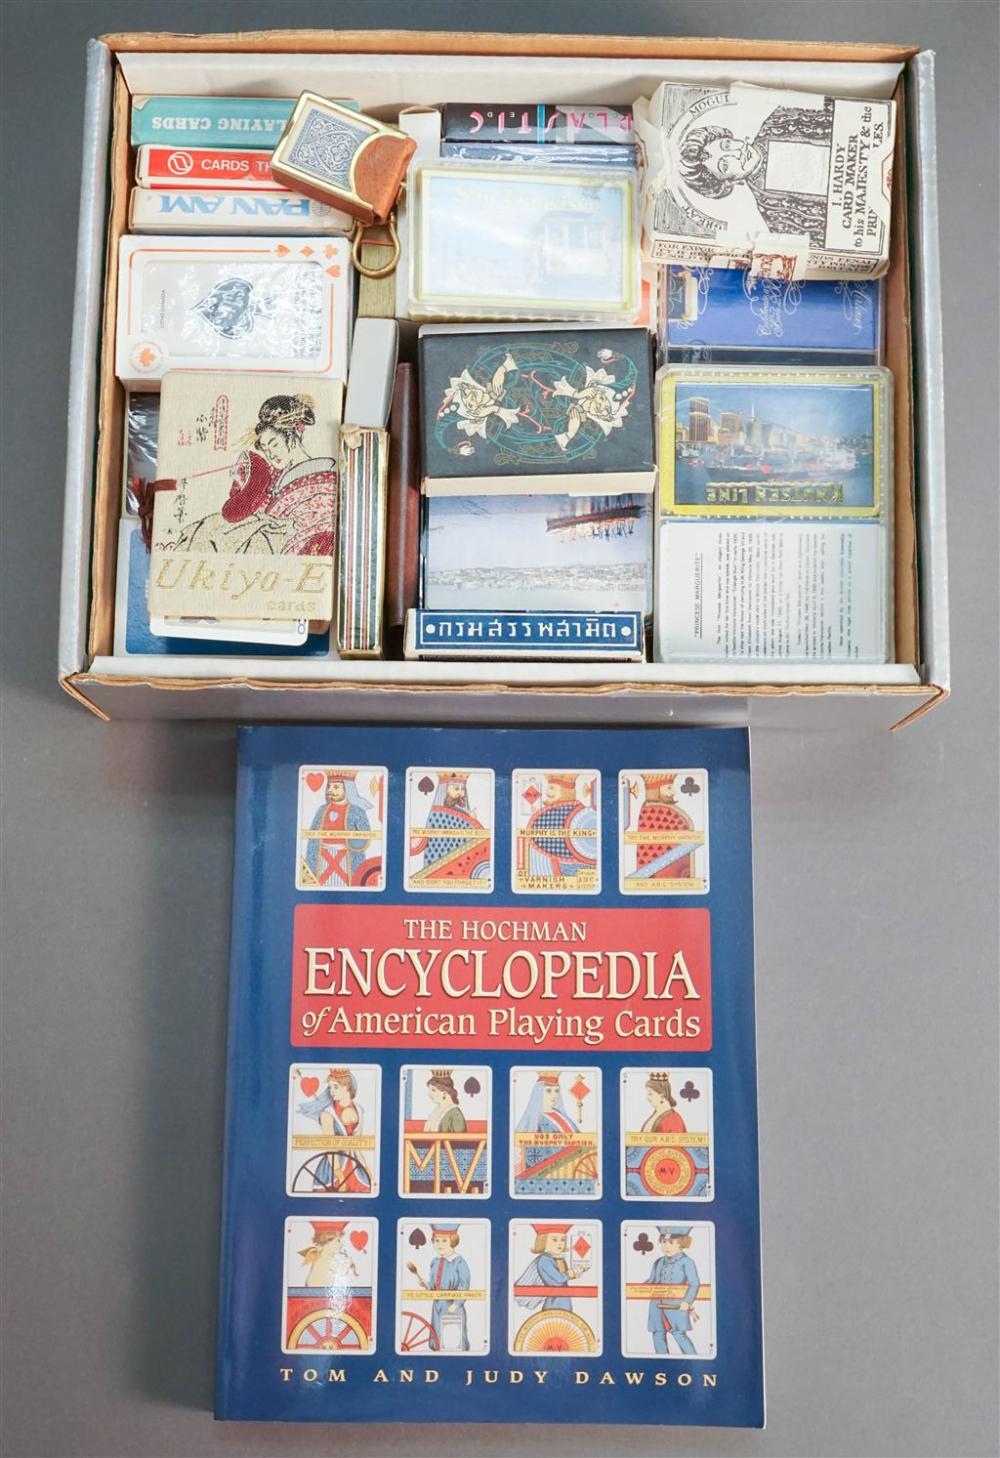 BOX WITH COLLECTIBLE PLAYING CARDS